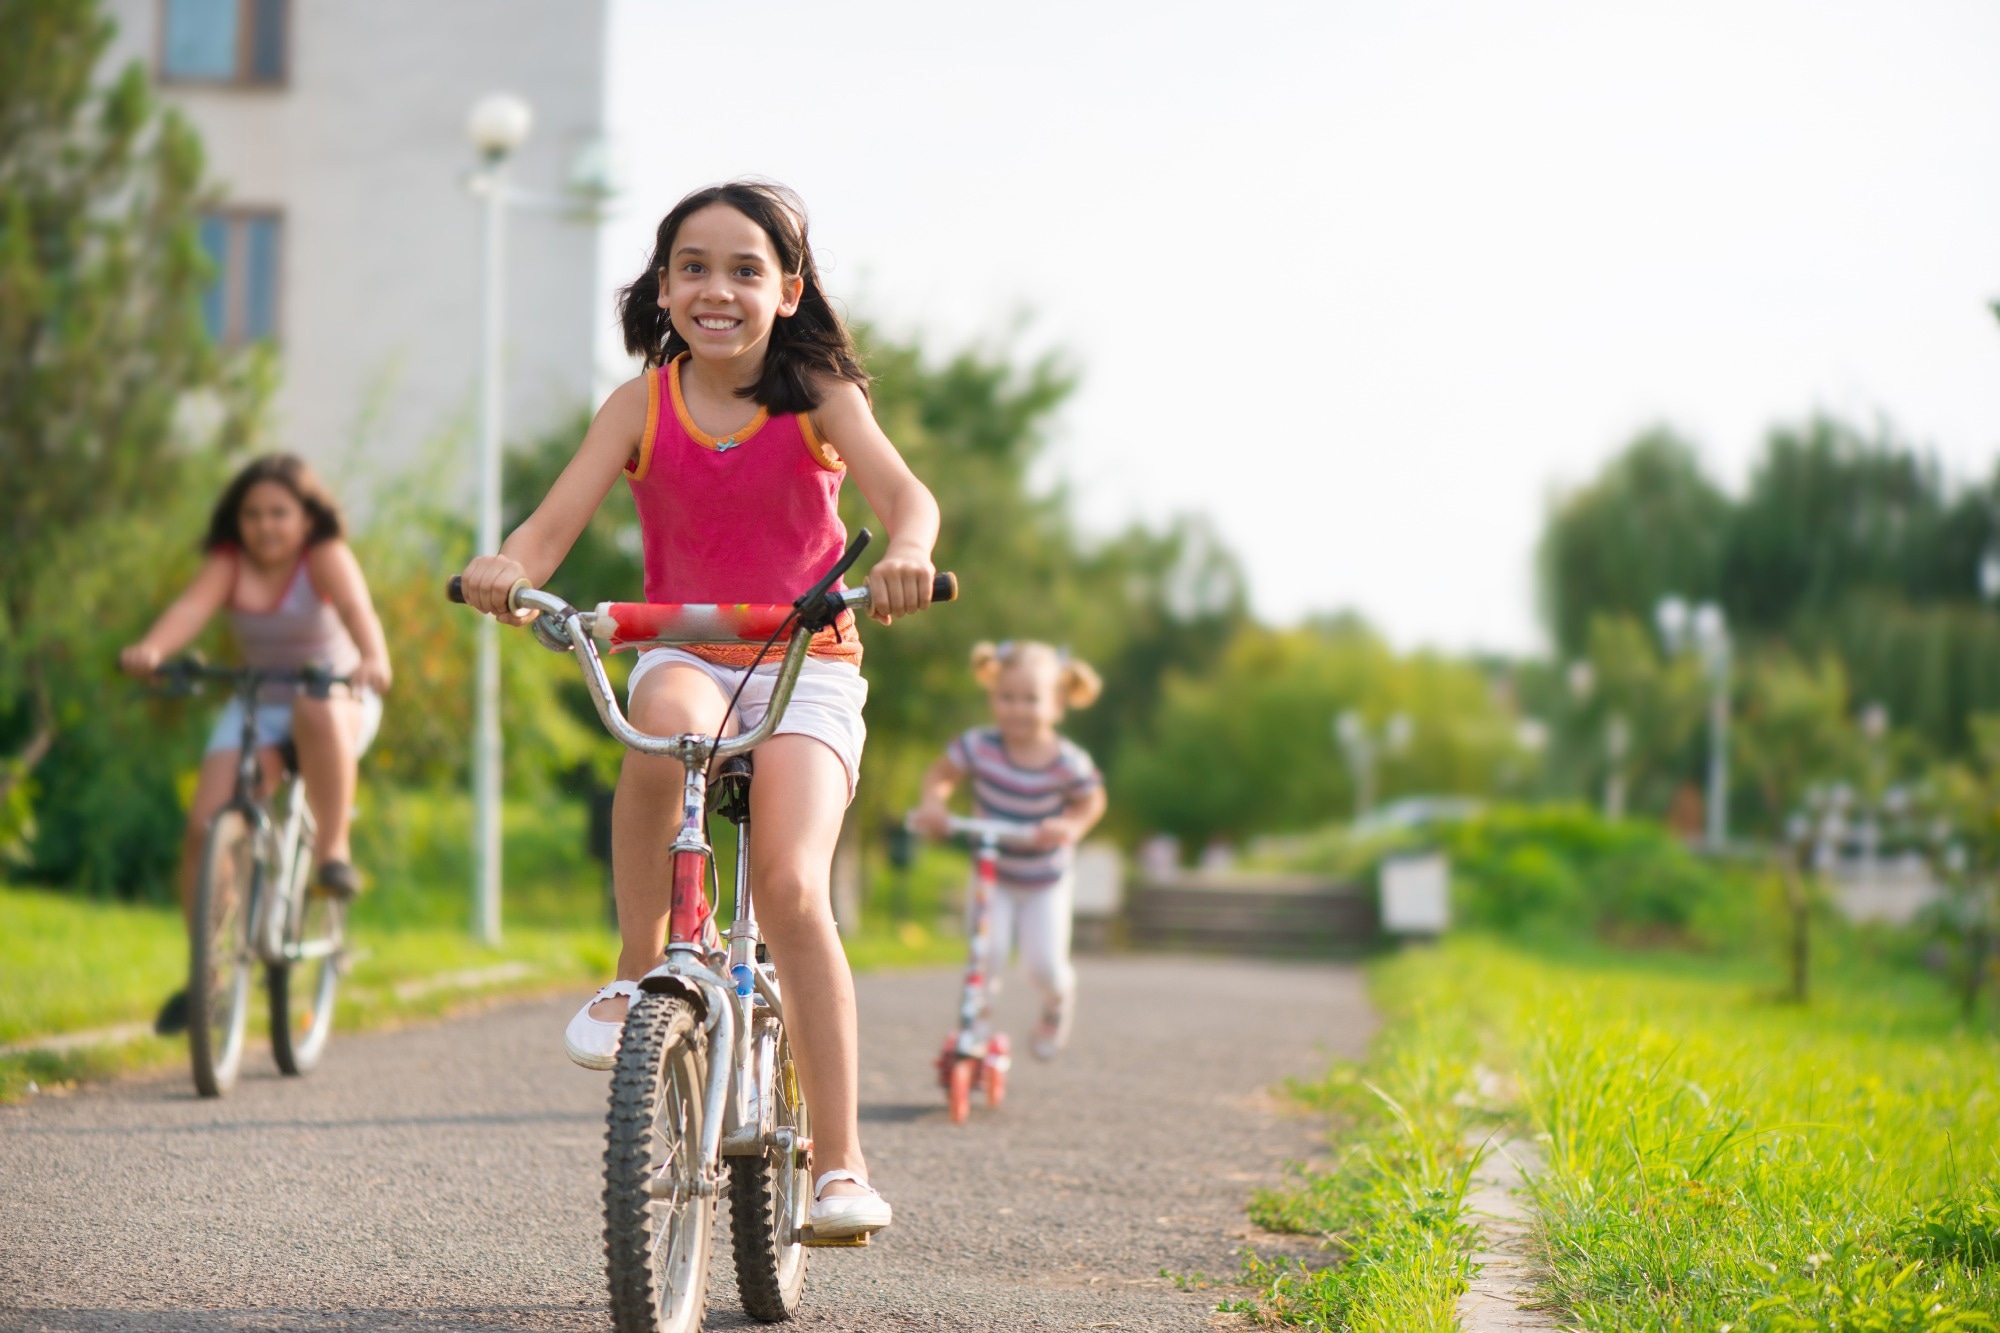 Study: Physical activity in young children across developmental and health states: the ActiveCHILD study. Image Credit: spass / Shutterstock.com